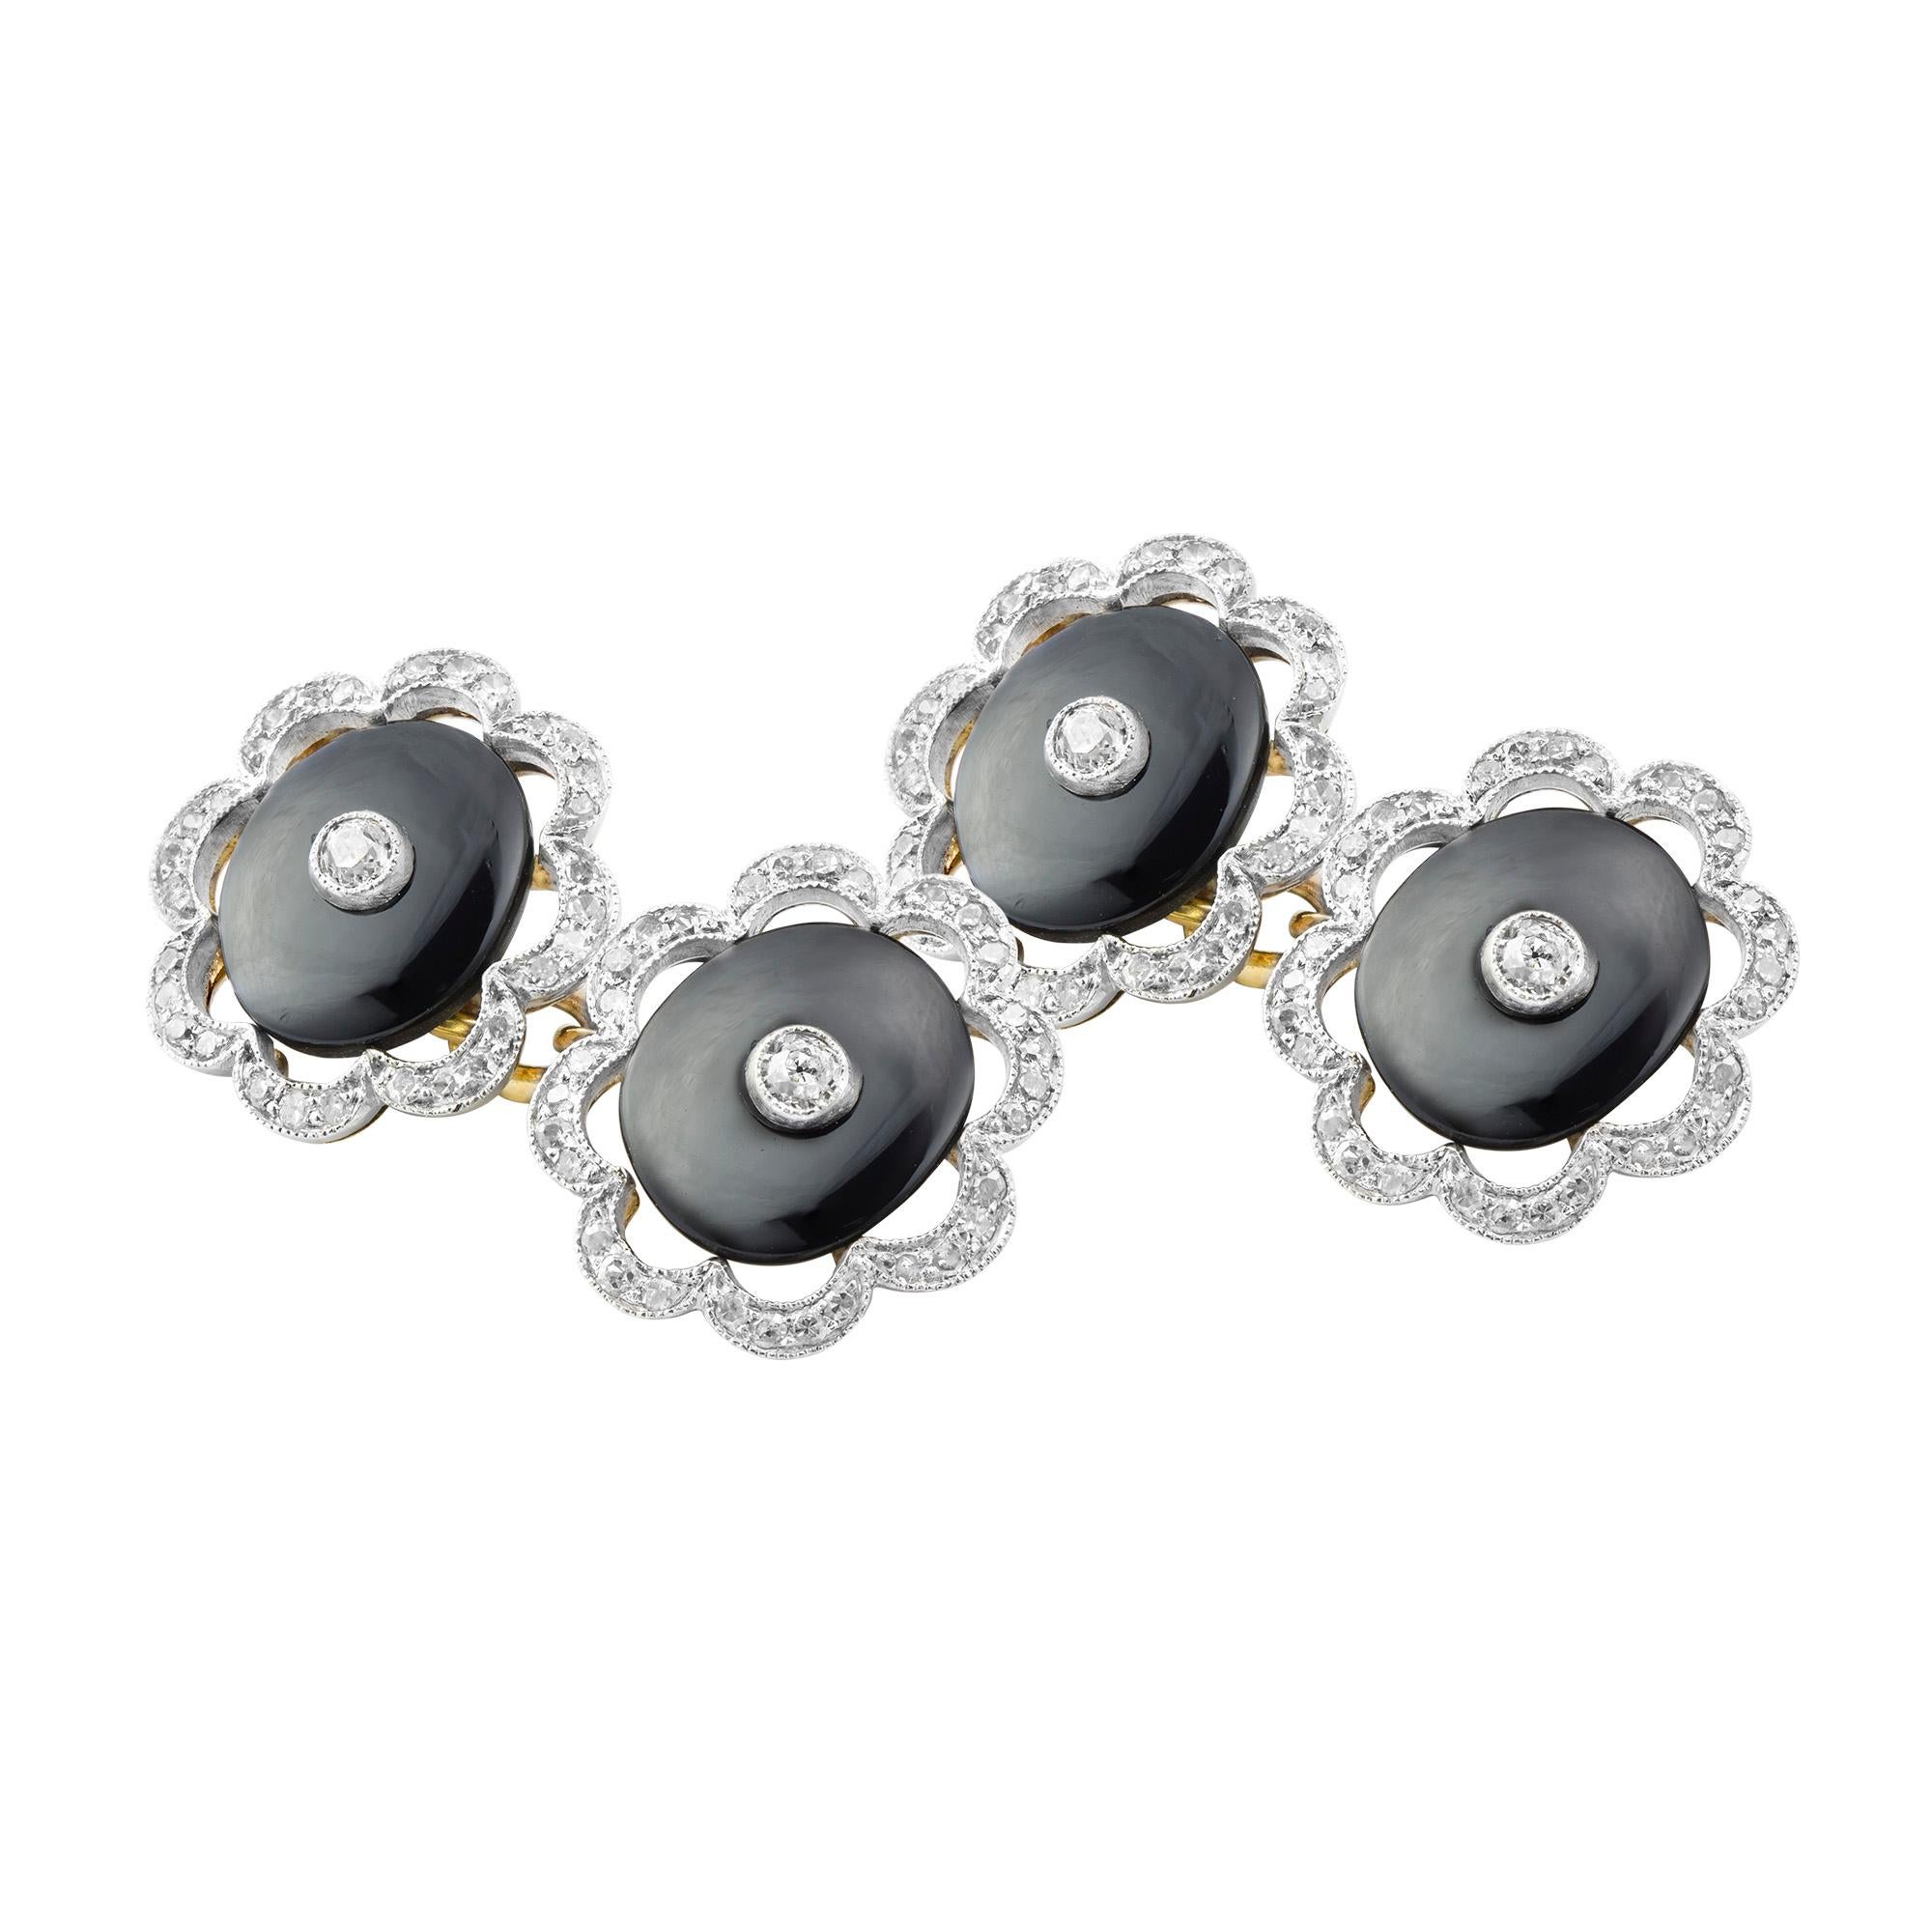 A pair of Art Deco onyx and diamond scalloped cufflinks, the oval onyx discs measuring approximately 10 x 8mm with a central old brilliant cut diamond in a millegrain setting, all surrounded by an openwork scalloped border millegrain set with